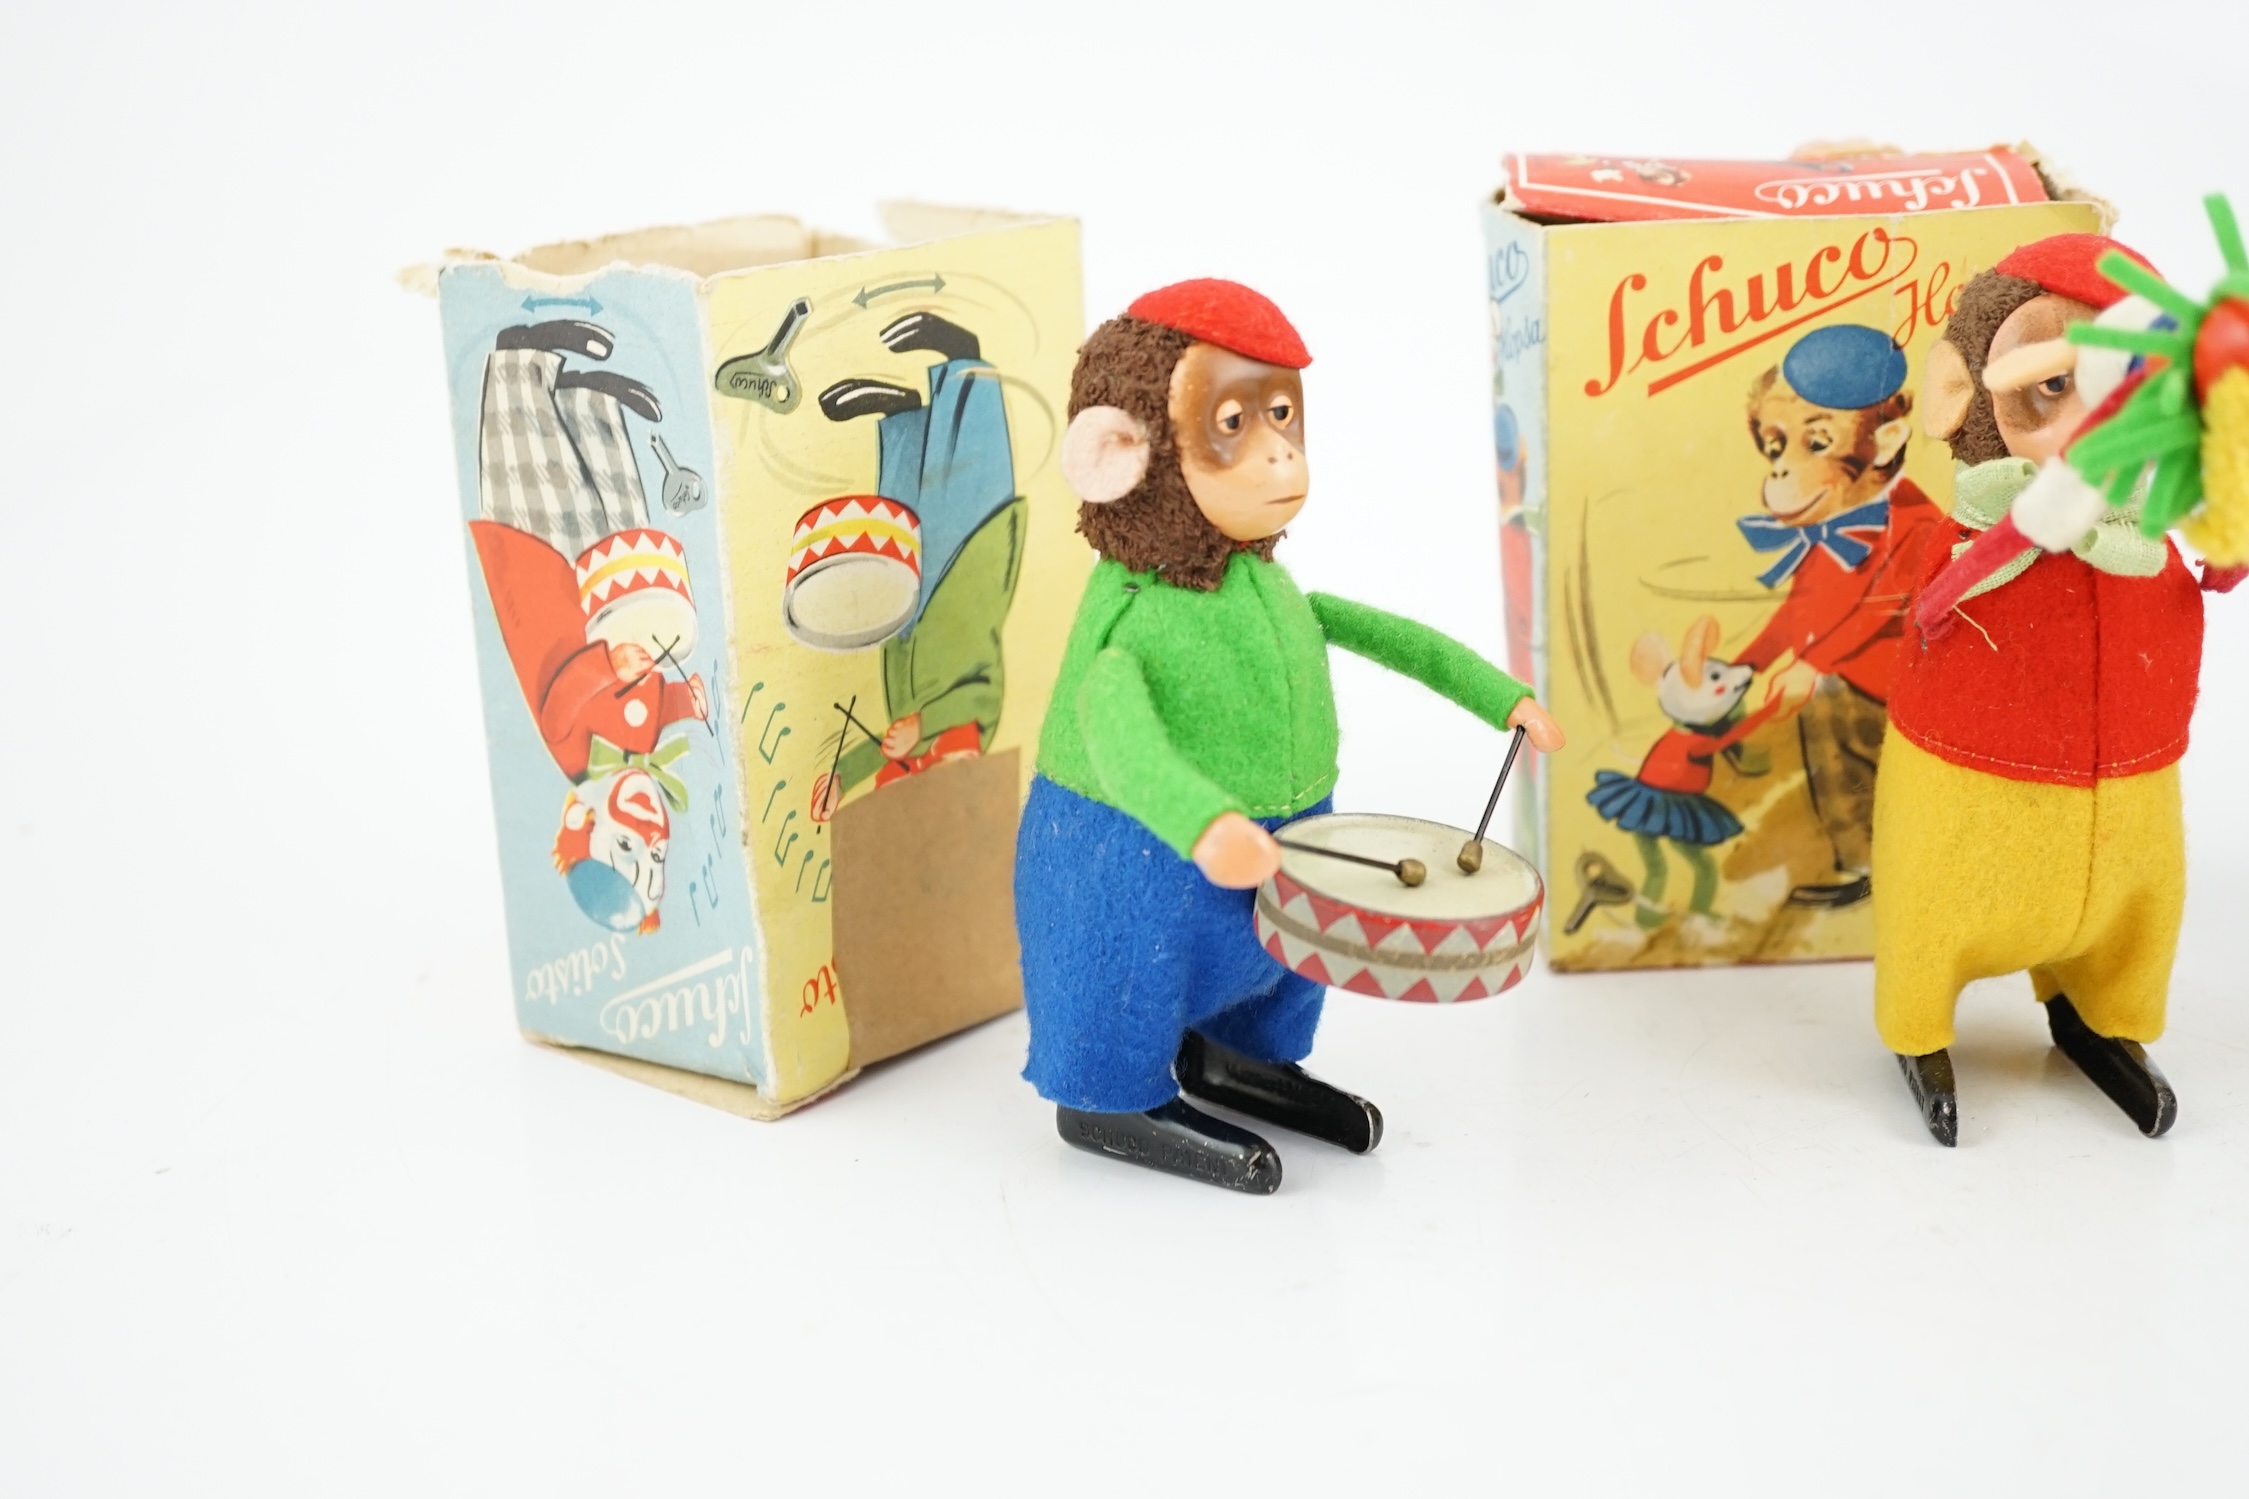 Three Schuco tinplate and felt clockwork monkeys; Hopsa, Solisto and Sousto, all contained within - Image 6 of 8